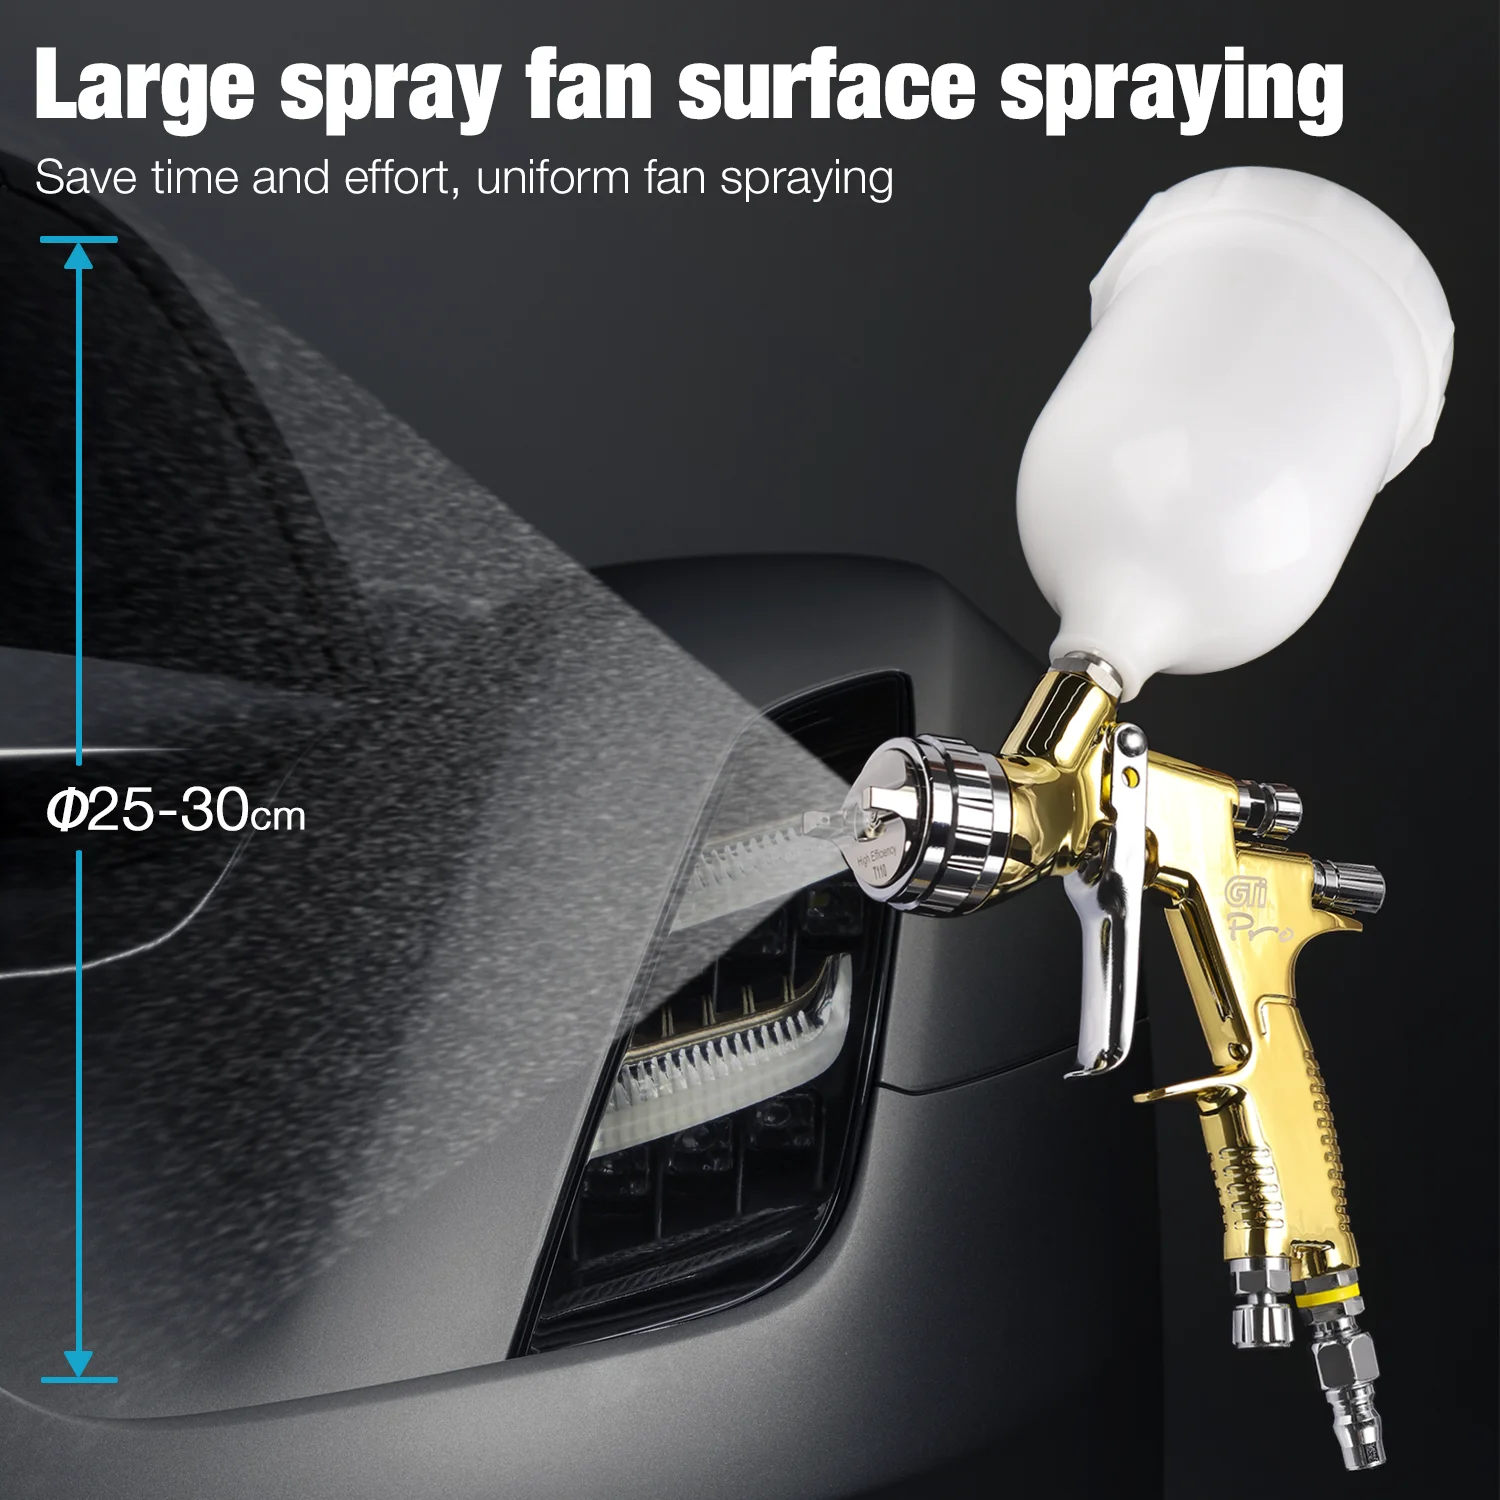 New High Quality Spray  GTI Pro 1.m Nozzle Painting  High Atomization Paint  Wat - £150.10 GBP